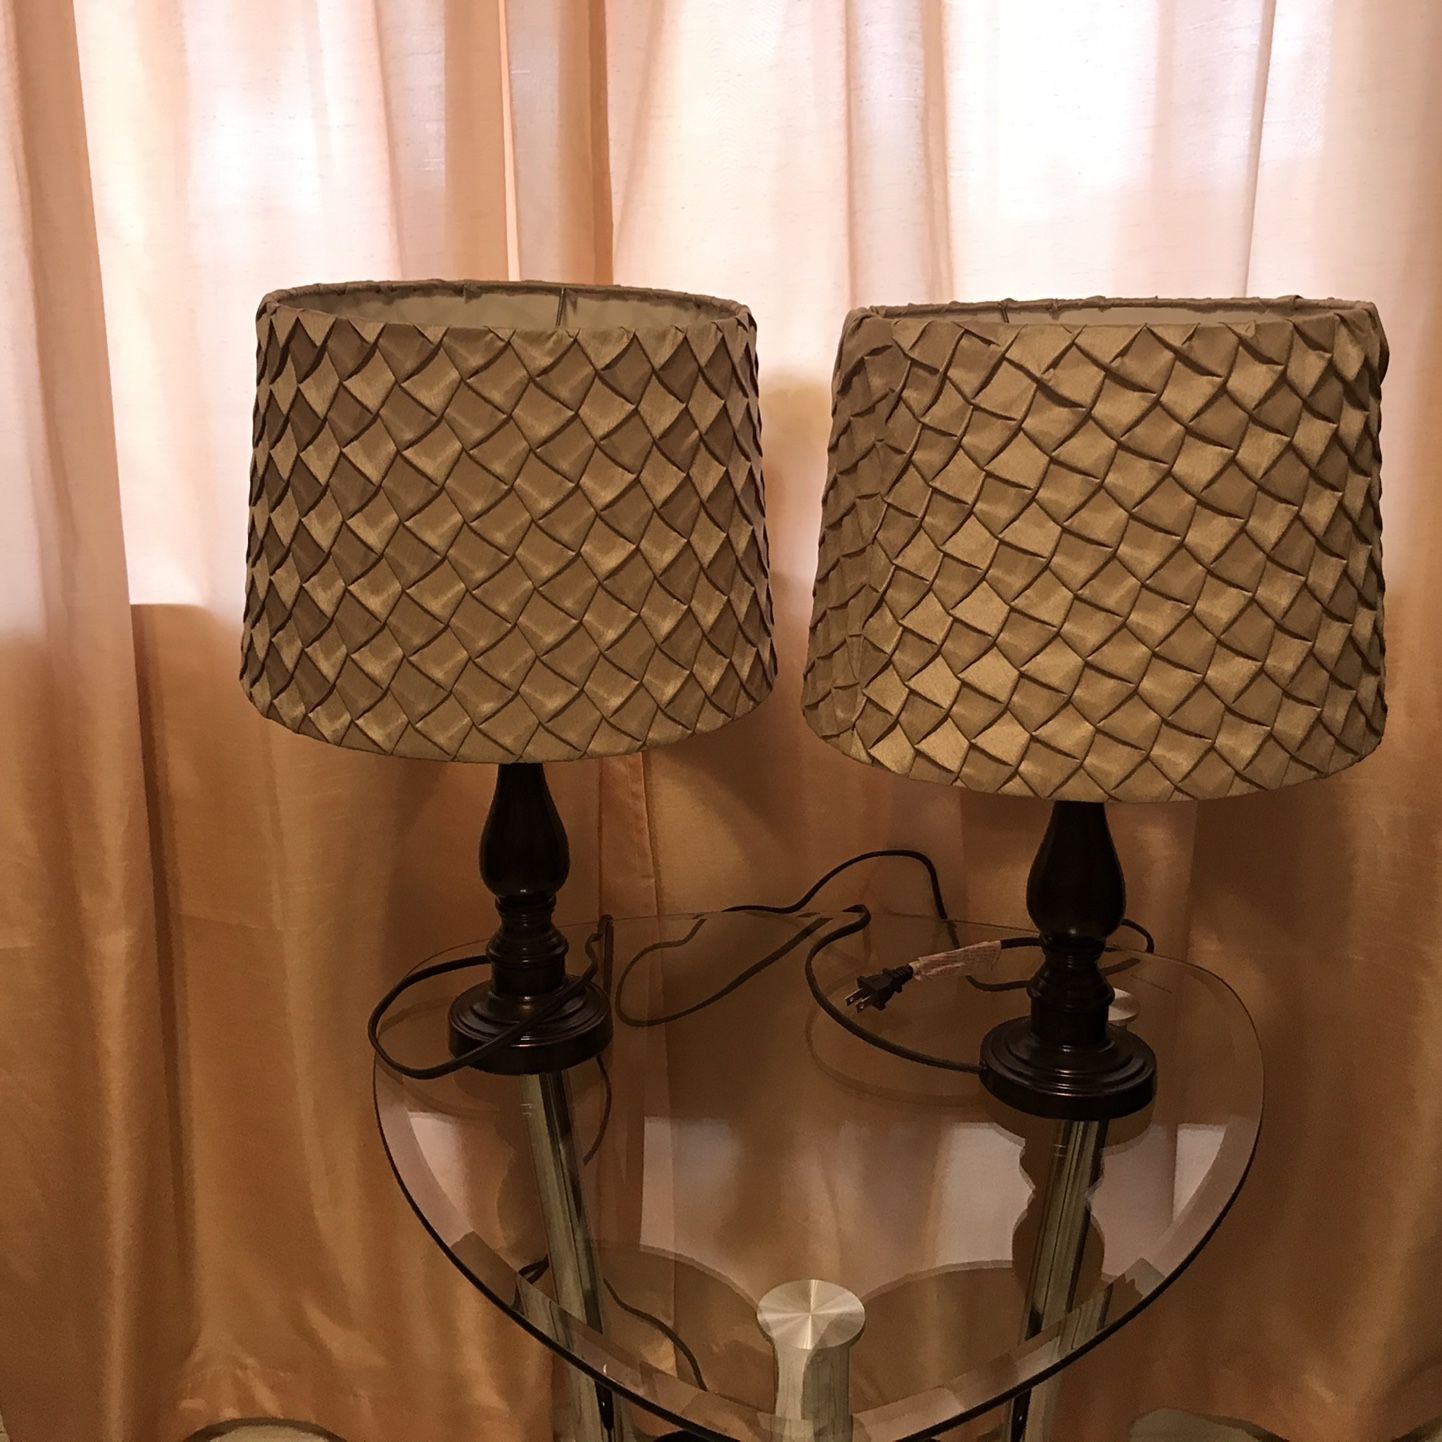 Set Of Beige Lamp $20,3 Set Of Glass Table $80